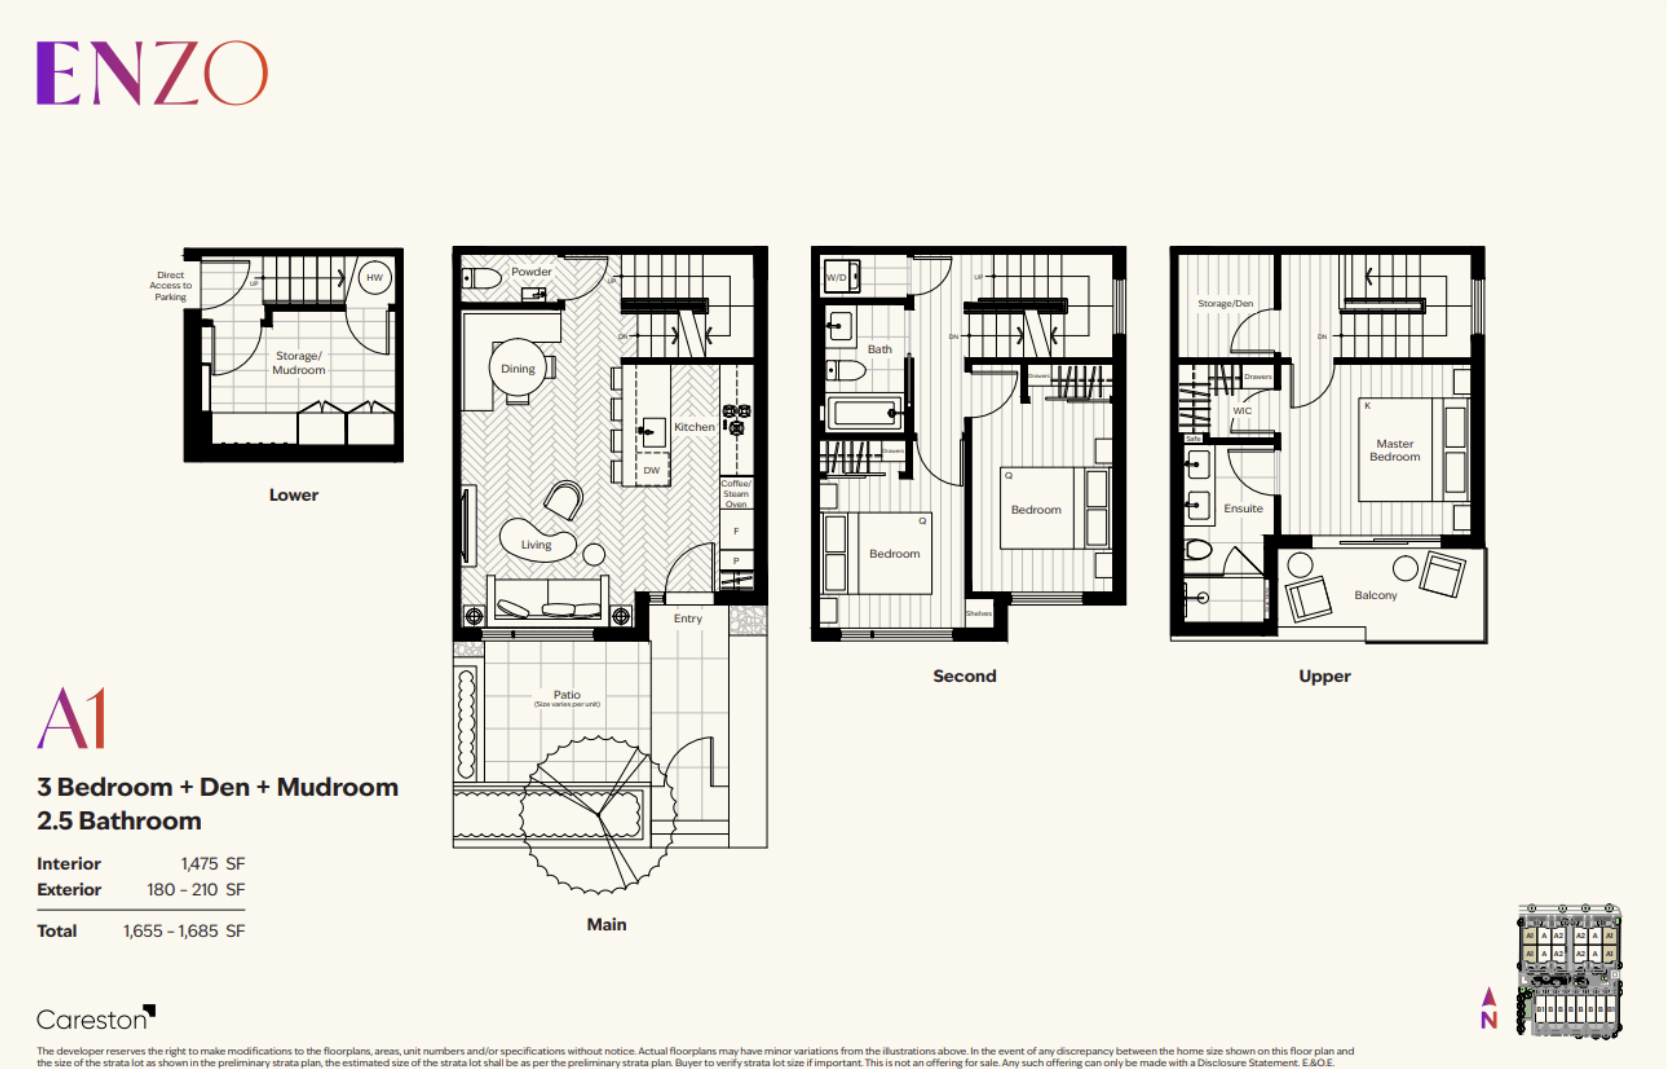 Vancouver townhouses for sale enzo A1